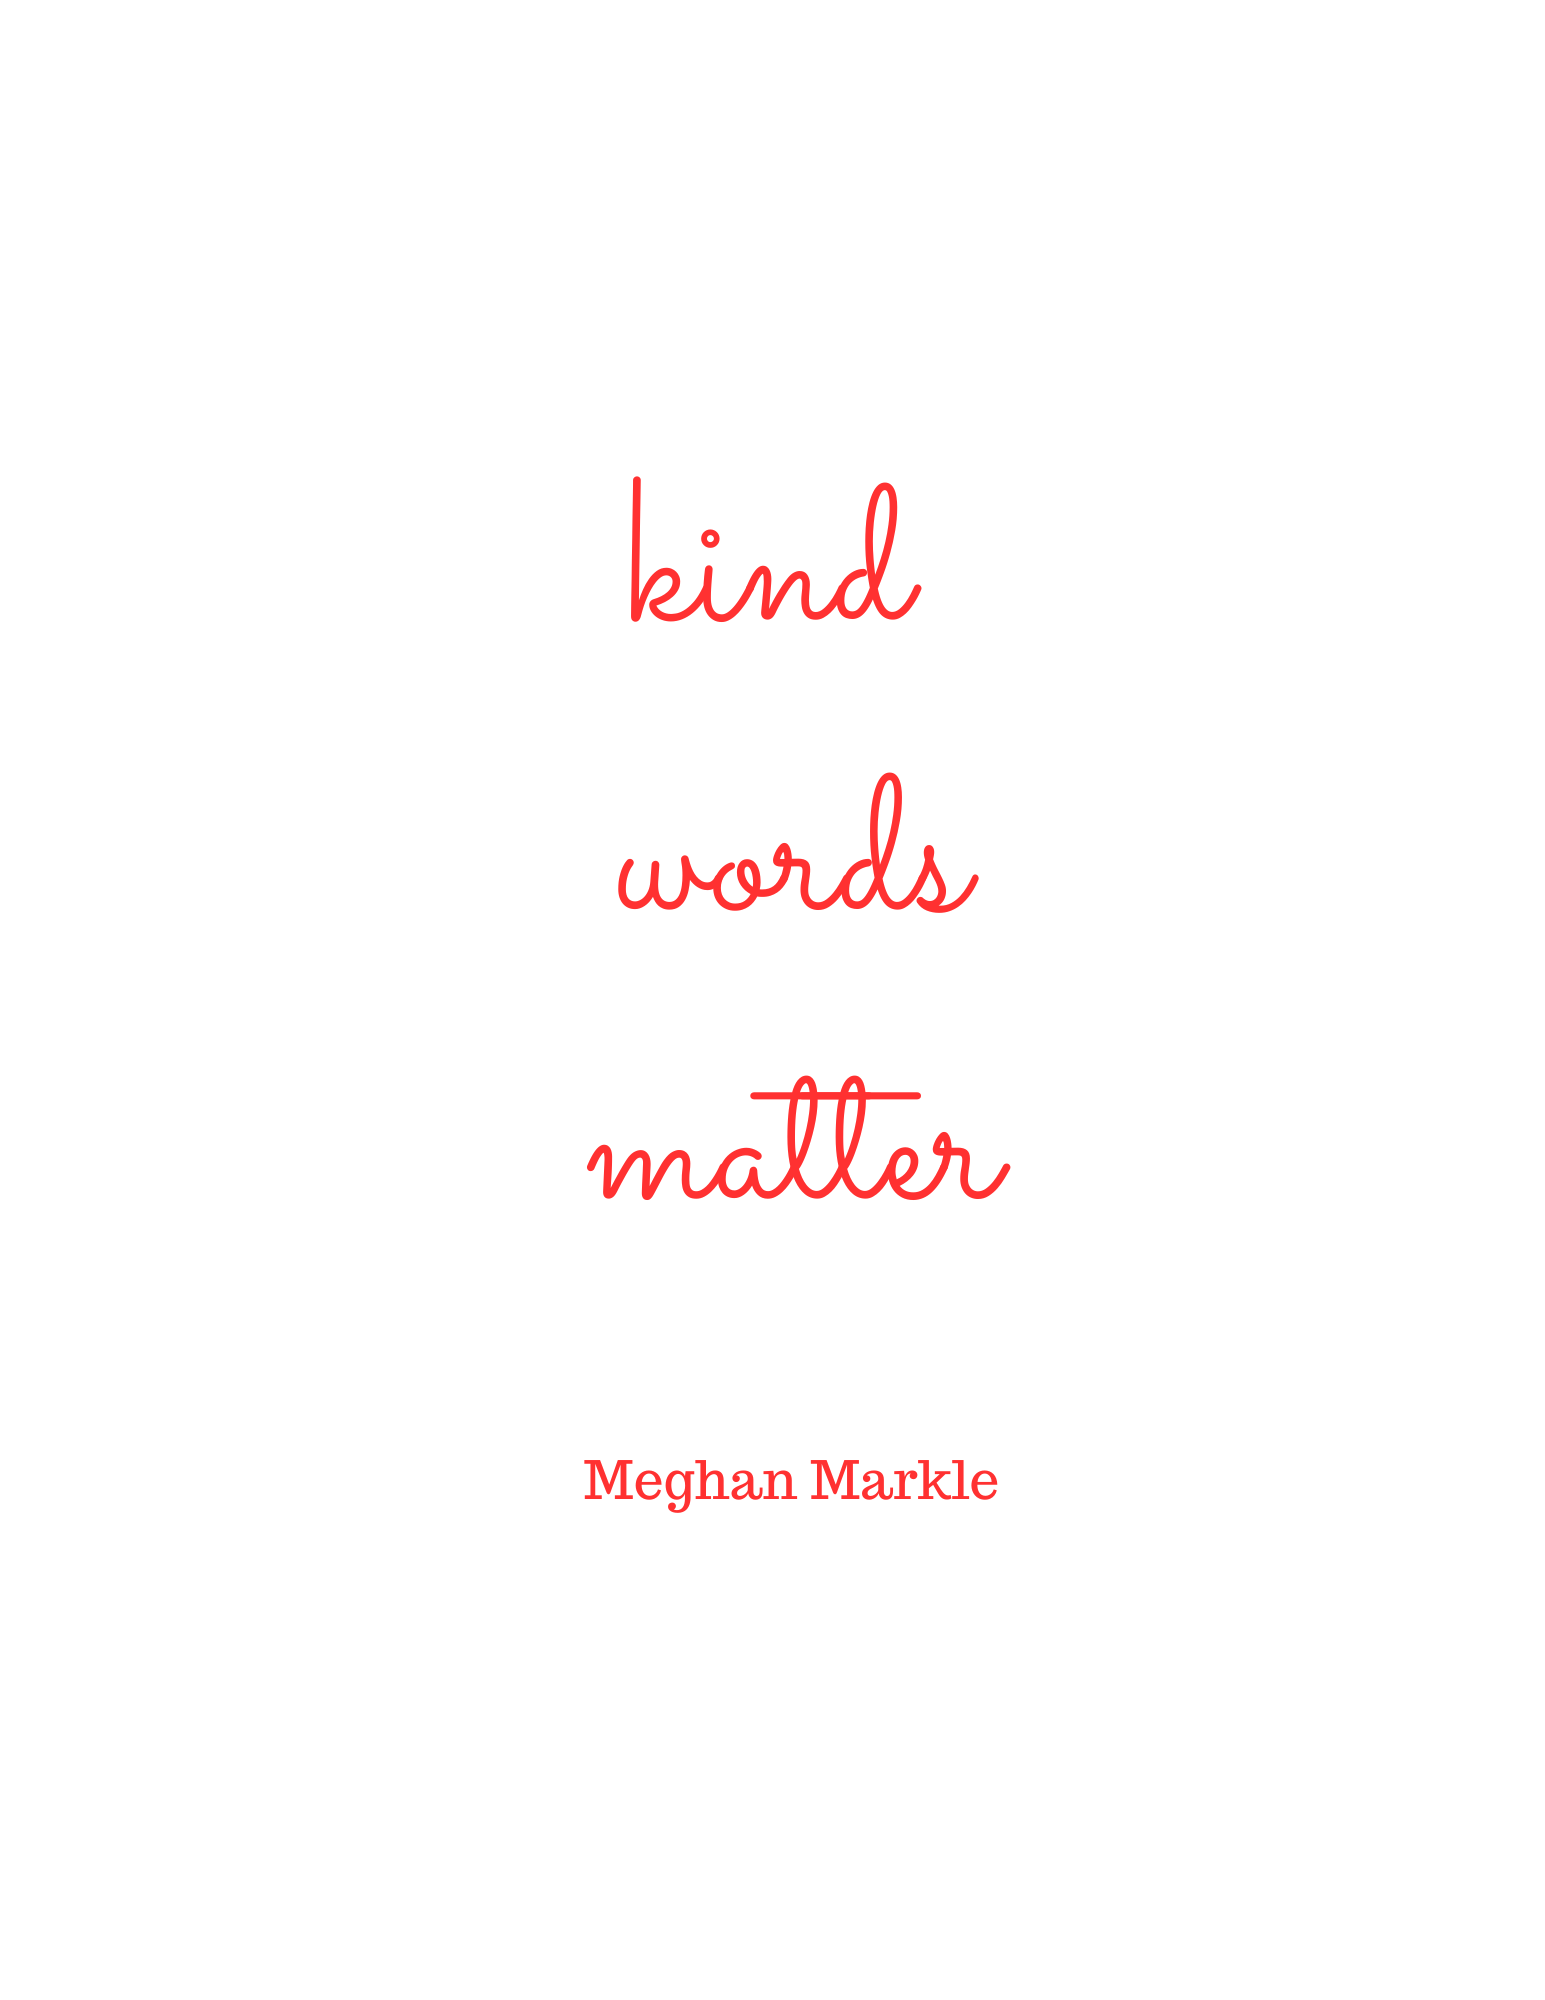 Kind words matter - a quote by Meghan Markle